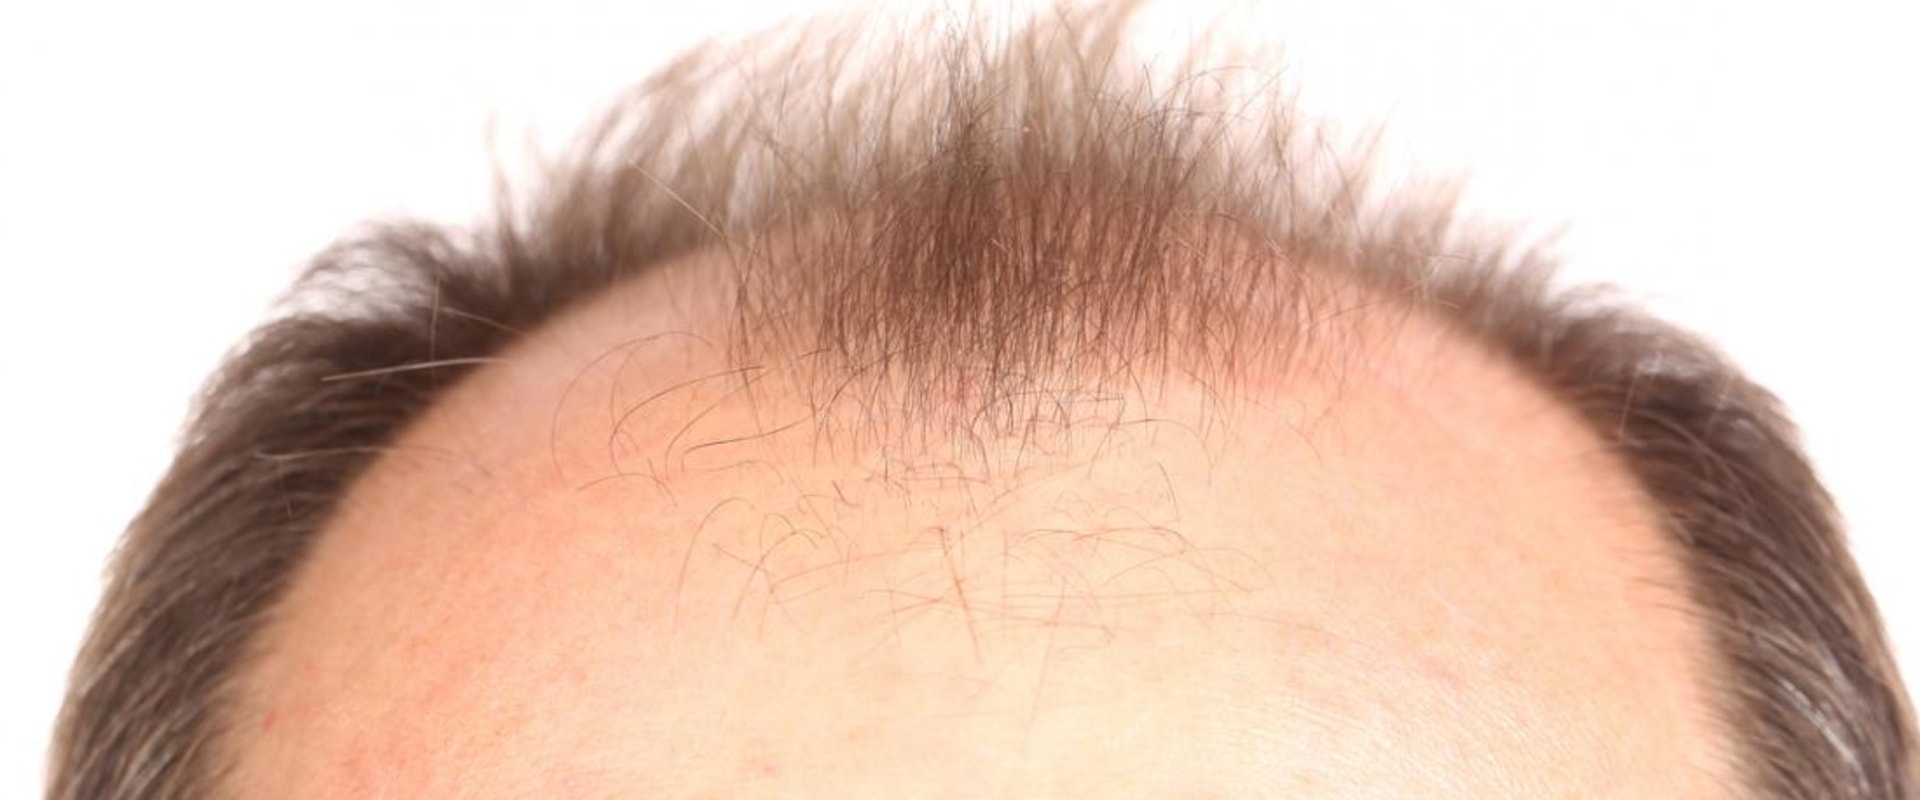 Medical Treatments for Male Pattern Baldness